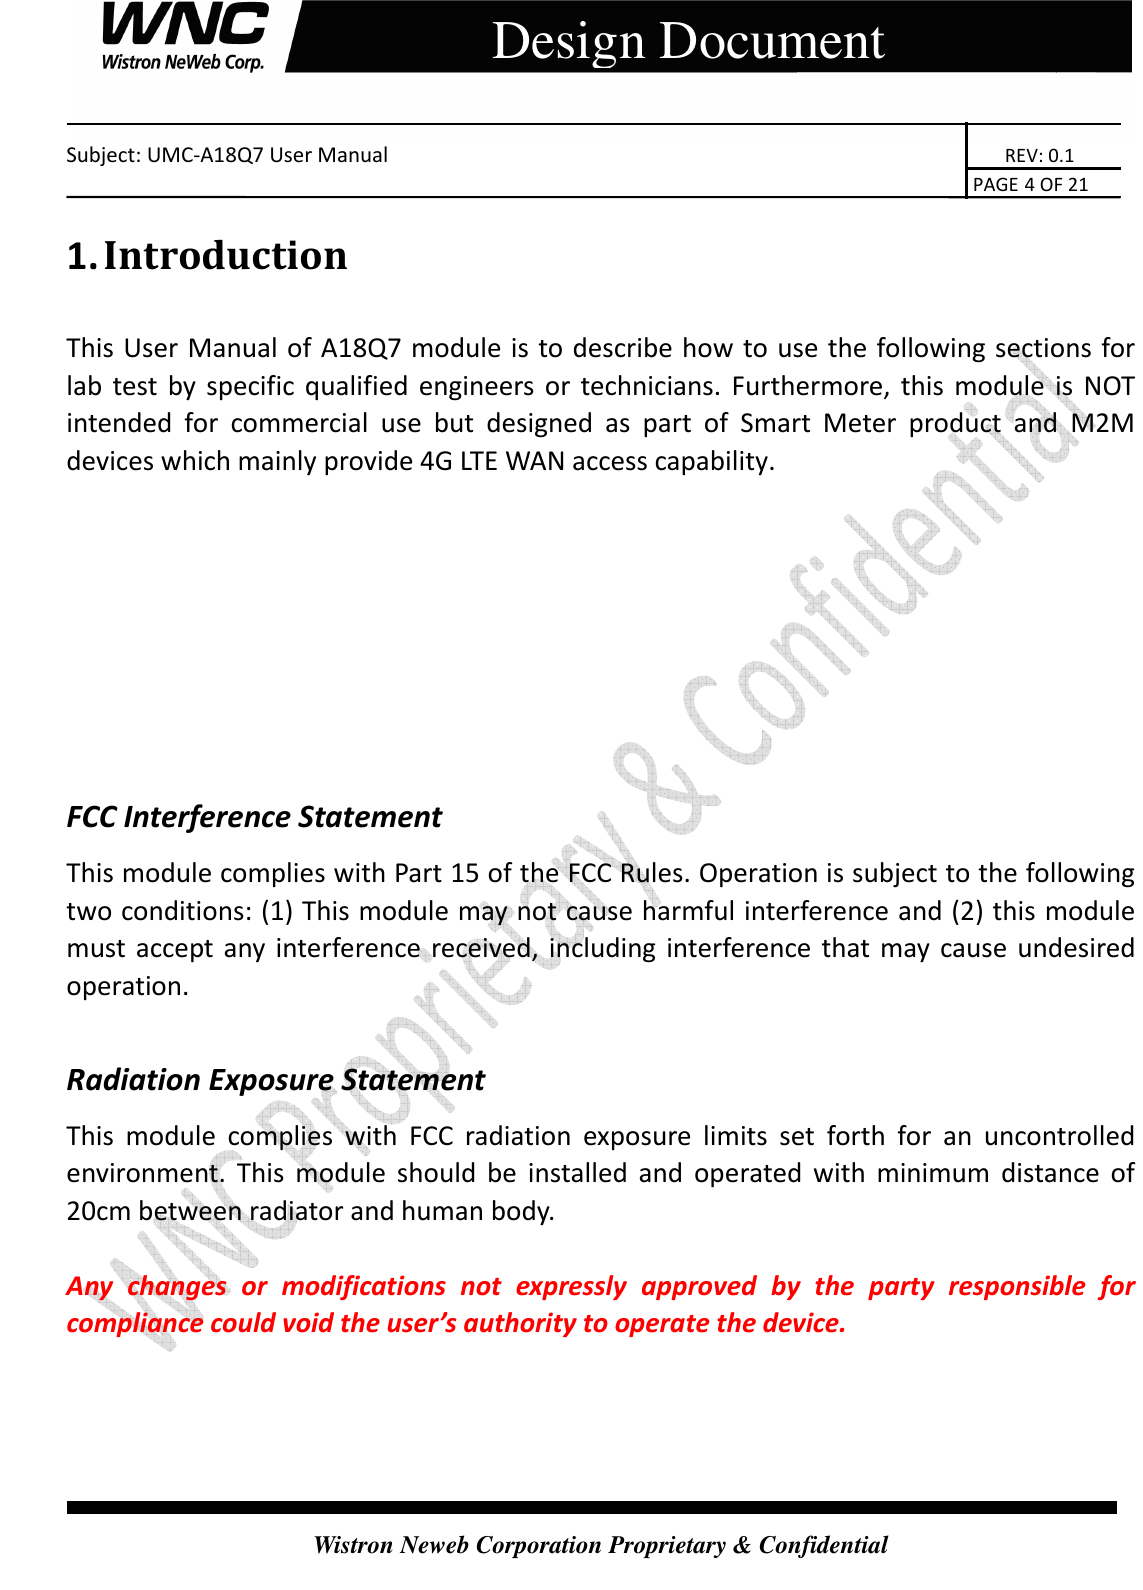    Subject: UMC-A18Q7 User Manual                                                                       REV: 0.1                                                                                                                                                                               PAGE 4 OF 21  Wistron Neweb Corporation Proprietary &amp; Confidential     Design Document 1. Introduction This User Manual of A18Q7 module is to describe how to use the following sections for lab  test  by  specific qualified  engineers  or  technicians.  Furthermore,  this  module  is  NOT intended  for  commercial  use  but  designed  as  part  of  Smart  Meter  product  and  M2M devices which mainly provide 4G LTE WAN access capability.     FCC Interference Statement This module complies with Part 15 of the FCC Rules. Operation is subject to the following two conditions: (1) This module may not cause harmful interference and (2) this module must accept any interference  received,  including interference that  may  cause undesired operation.  Radiation Exposure Statement This  module  complies  with  FCC  radiation  exposure  limits  set  forth  for  an  uncontrolled environment.  This  module  should  be  installed  and  operated  with  minimum  distance  of 20cm between radiator and human body.  Any  changes  or  modifications  not  expressly  approved  by  the  party  responsible  for compliance could void the user’s authority to operate the device. 